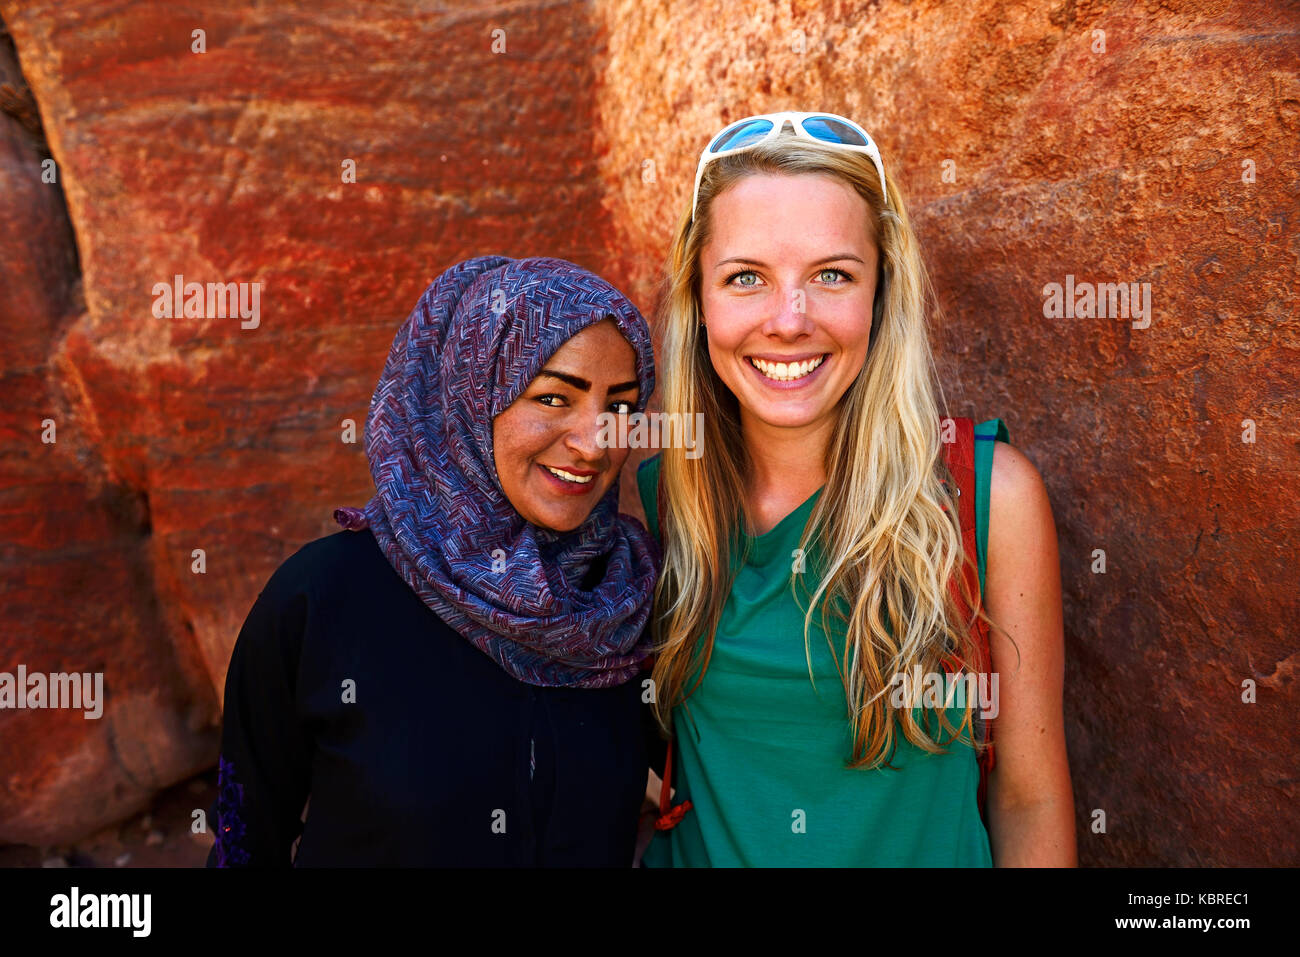 Tourist girl poses with local bedouin girl at colourful rock-formations in Petra, Wadi Musa, Jordan Stock Photo